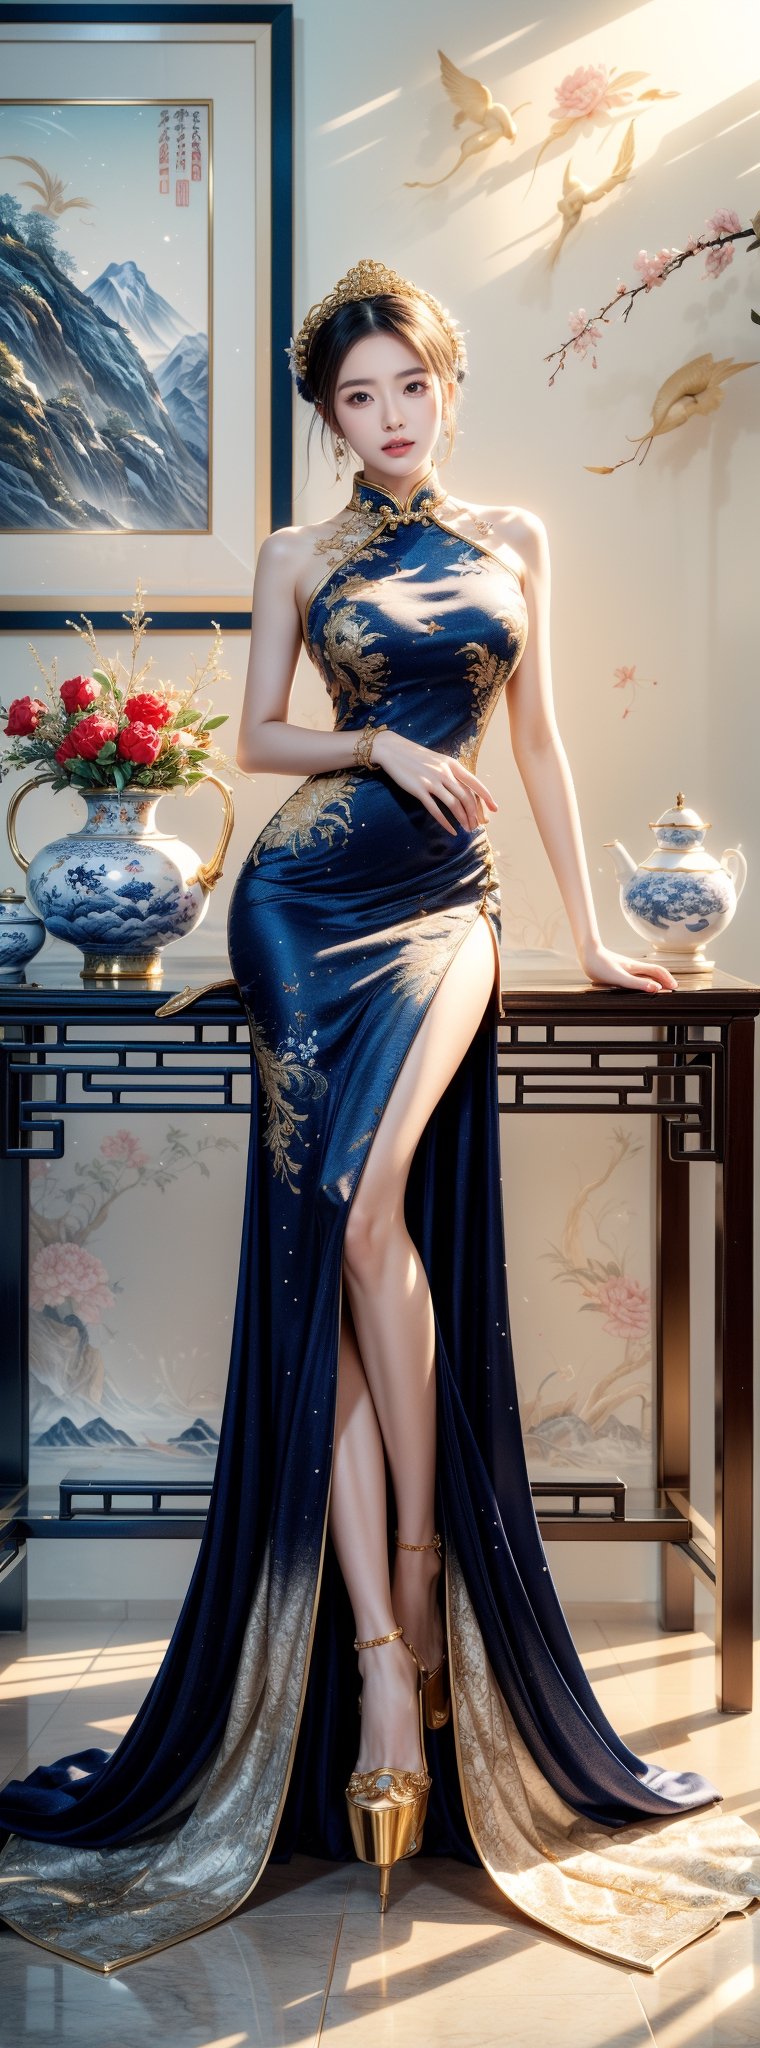 Ceramic material, beige gold tone, a 23-year-old Chinese beauty wearing a gorgeous high-collar dress, with an elegant and leisurely face, full body, sitting on a gorgeous single baroque sofa with a blue background and gold edges. Her outfit is predominantly white with navy blue trim and detailed with a detailed peony pattern. Her perfect long legs were exposed, and there was a blue and white porcelain teapot and teacup on the table next to the chair, indicating that this was a tea party. The floor beneath her feet was strewn with pearls and red beads. Directly behind the background is a gold-framed Chinese painting, and ornate interior decoration surrounds the central figure, adding to the luxurious feel of the scene.